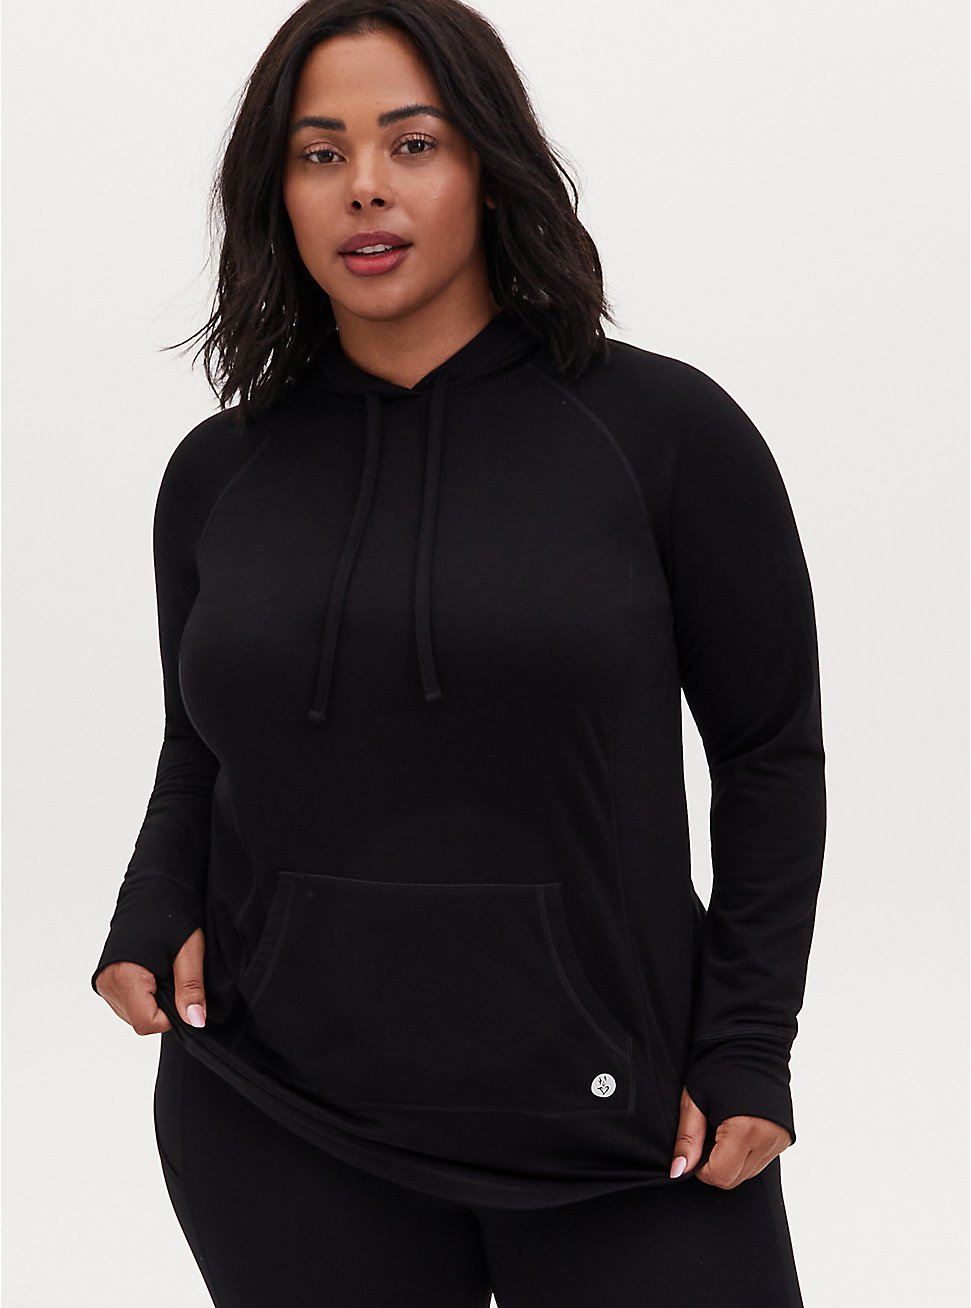 Plus Size - Black Active French Terry Pullover Tunic Hoodie - Torrid